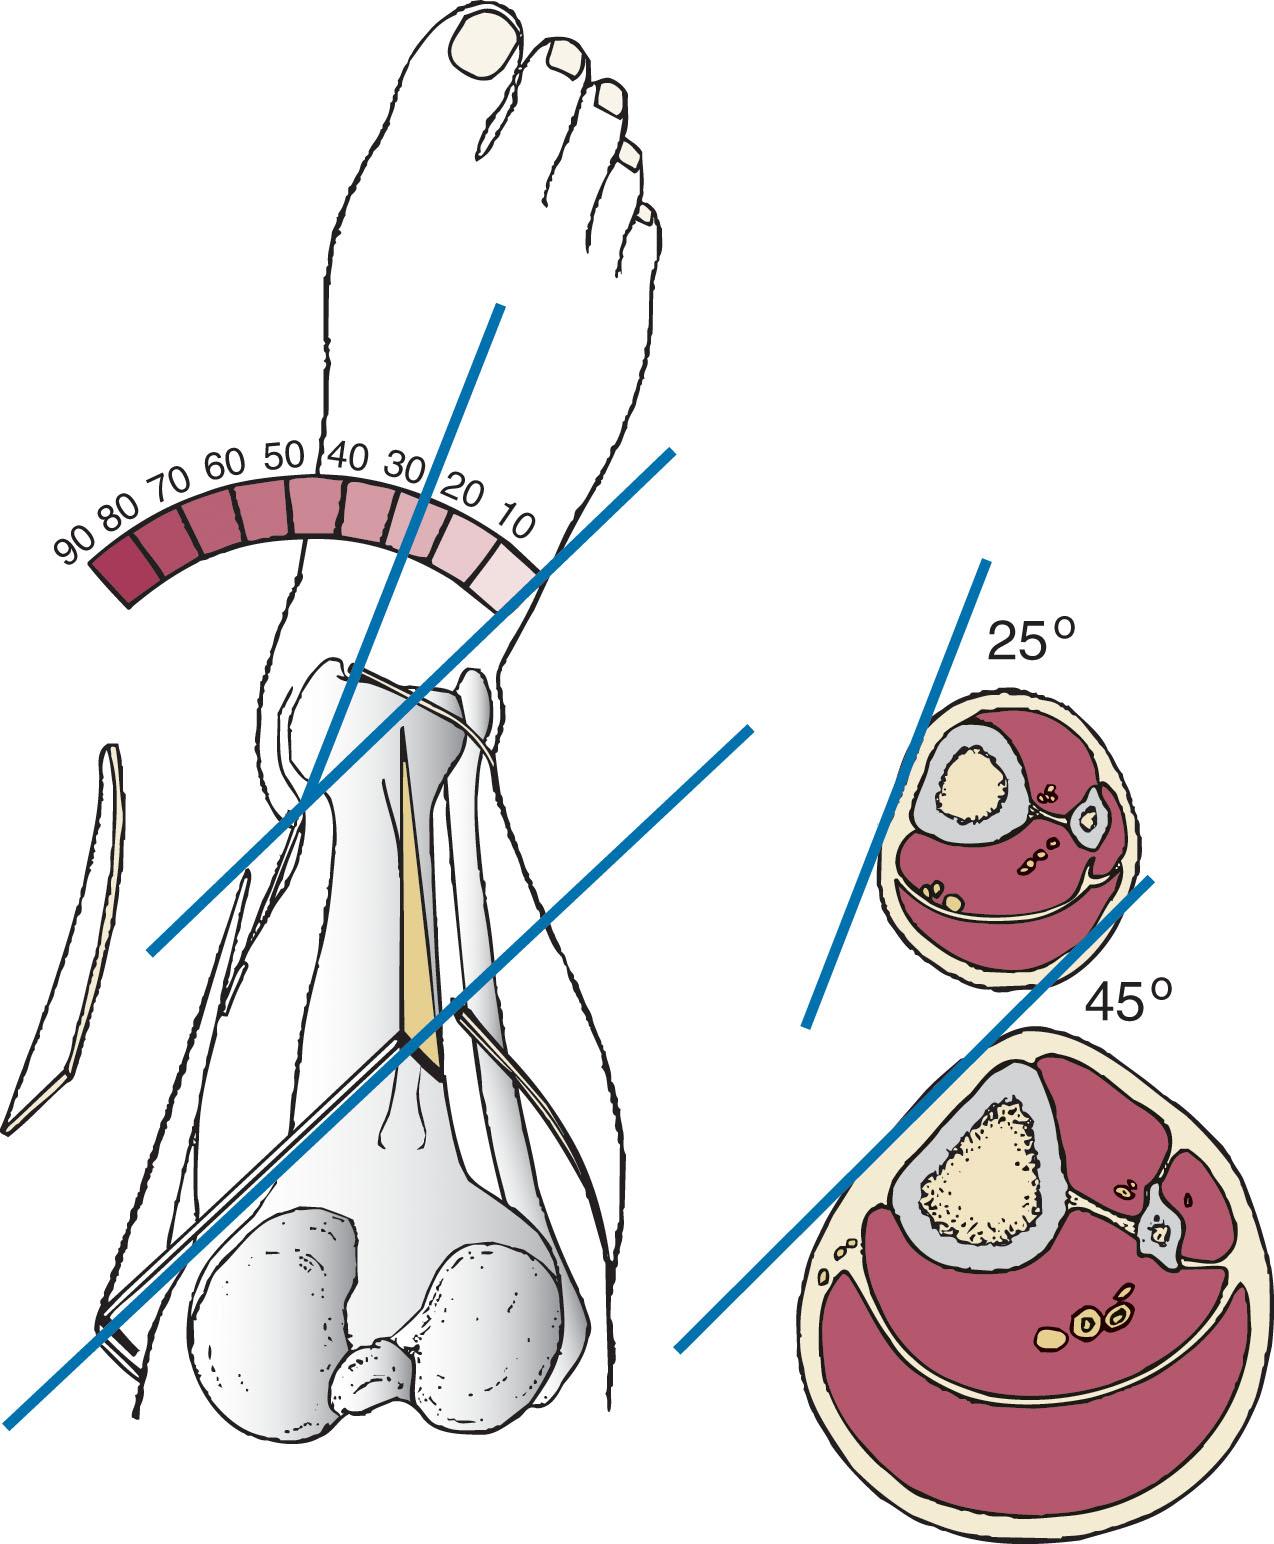 Fig. 43-4, Tibial torsion. At the distal end, the torsion is approximately 25 degrees. As one moves up the leg, the torsion becomes more extreme, approaching 45 degrees.